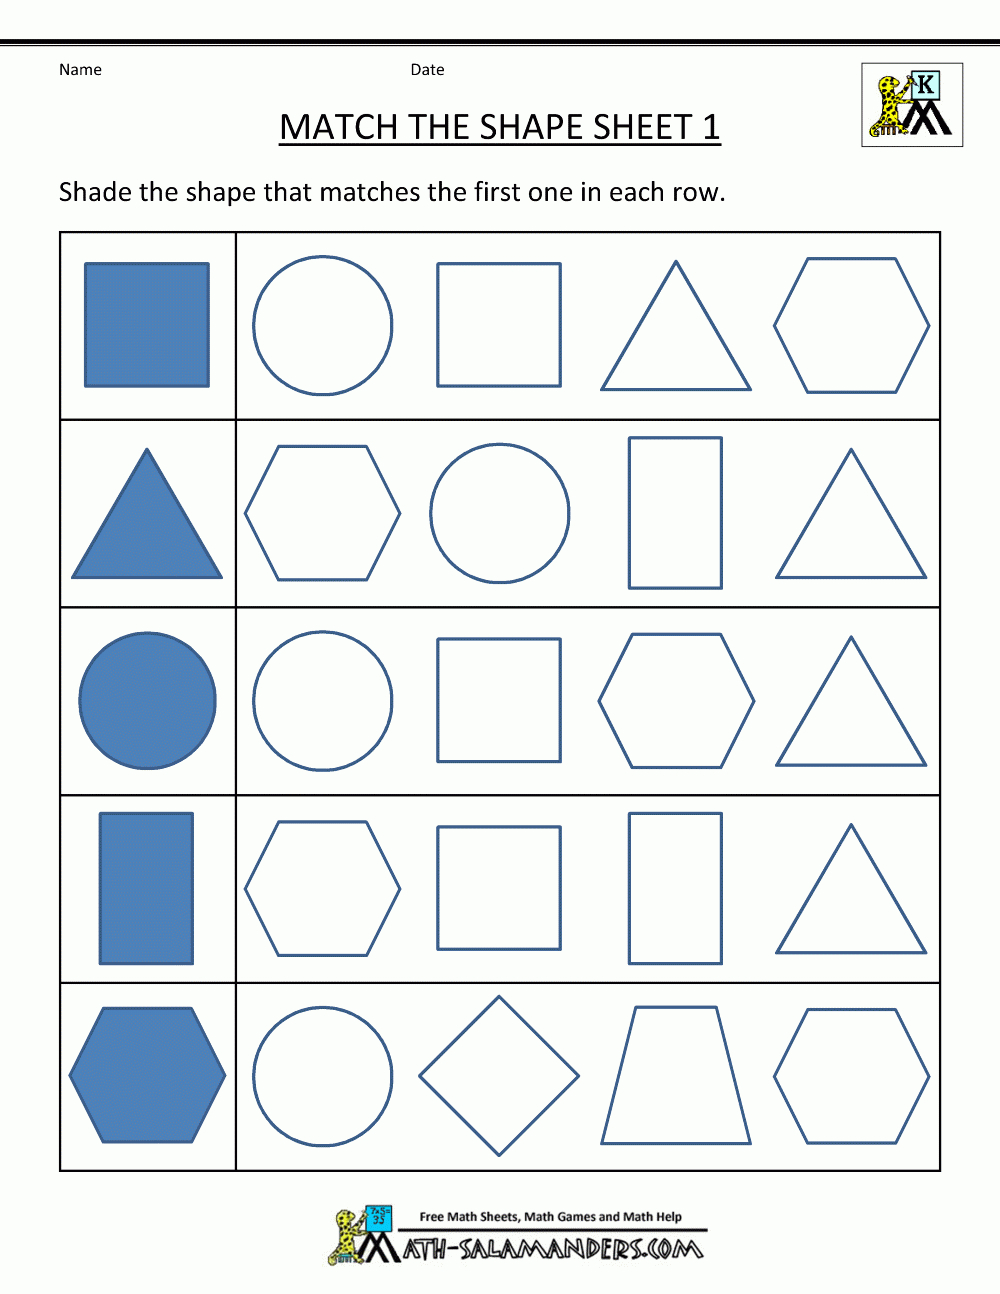 Free Printable Geometry Worksheets Match The Shapes 1 | Μαθηματικά - Free Printable Shapes Worksheets For Kindergarten